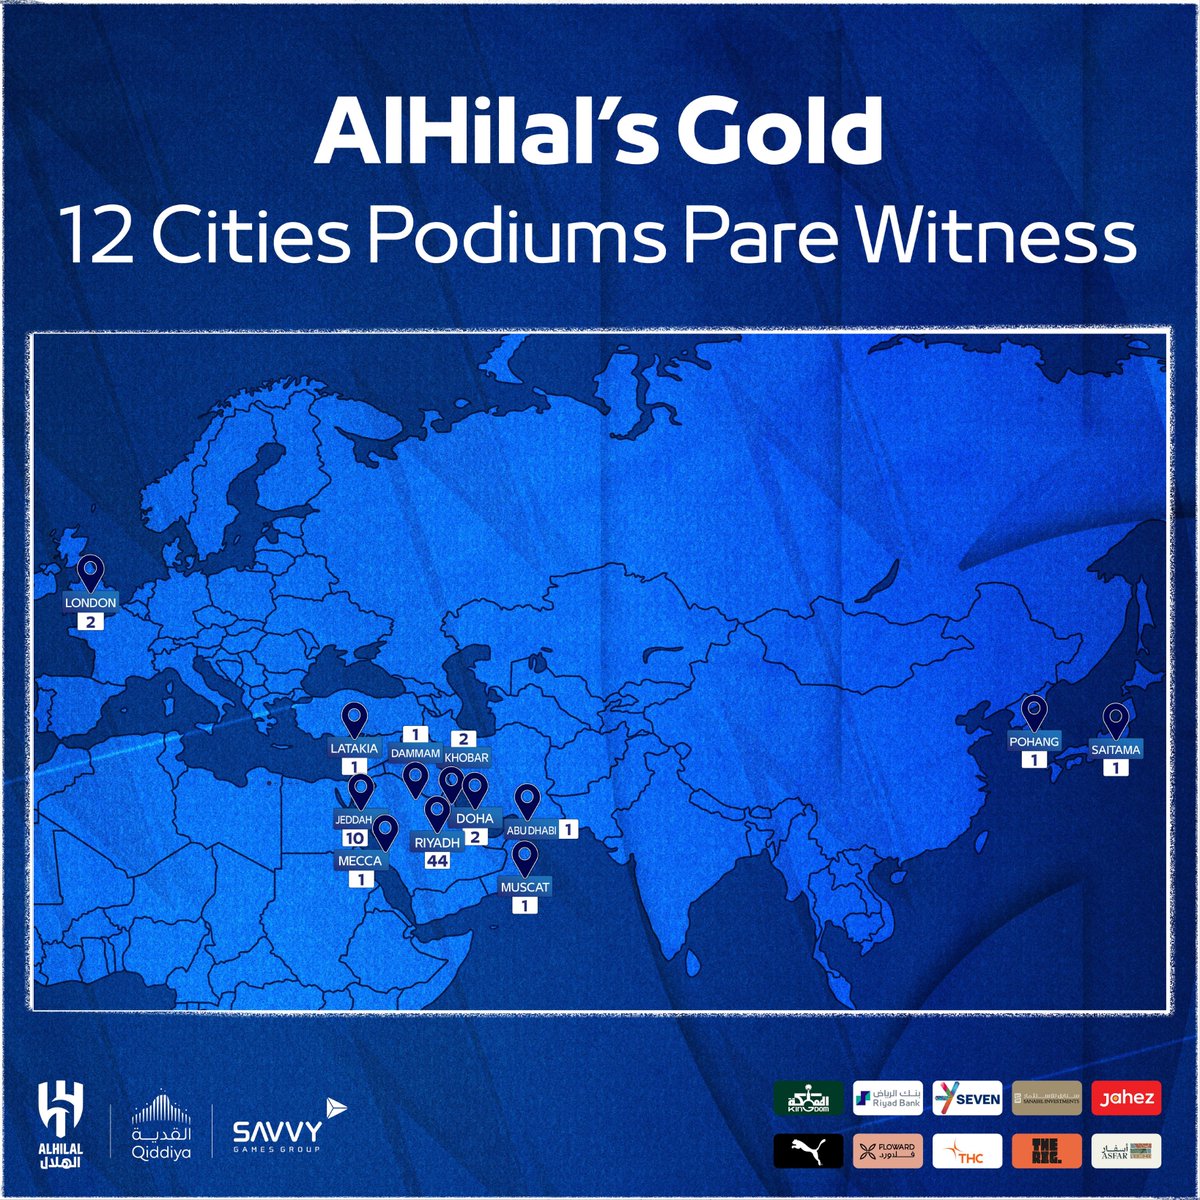 This time in Abu Dhabi 🇦🇪 🏆

To be added to 11 other cities 
#AlHilal67 🔝
#AlHilal 💙